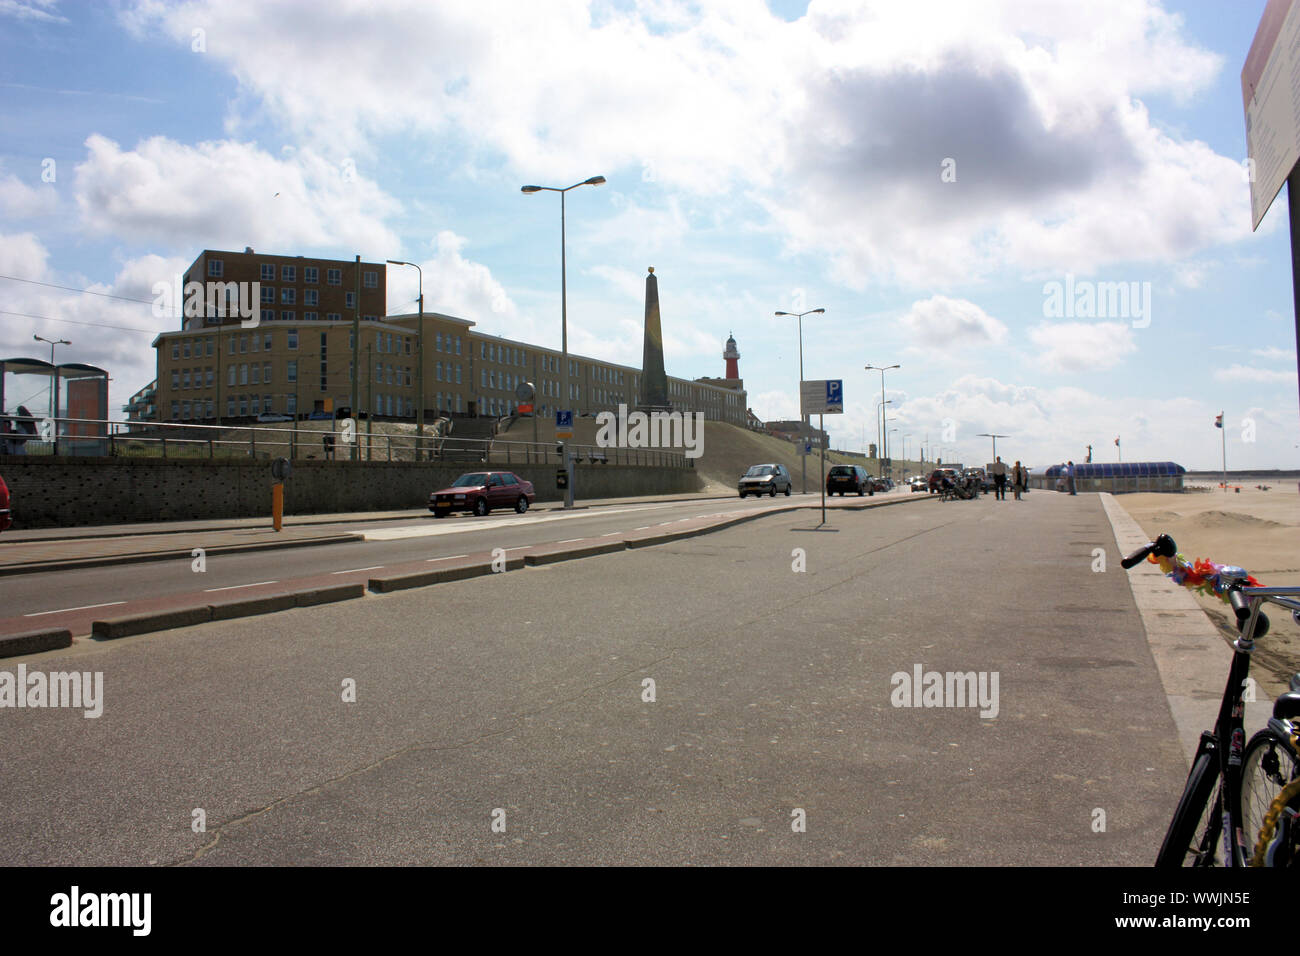 The Scheveningen Streets in Den Haag are quiet in ordinary days, but they will be very busy on the weekends and in the holidays. Stock Photo